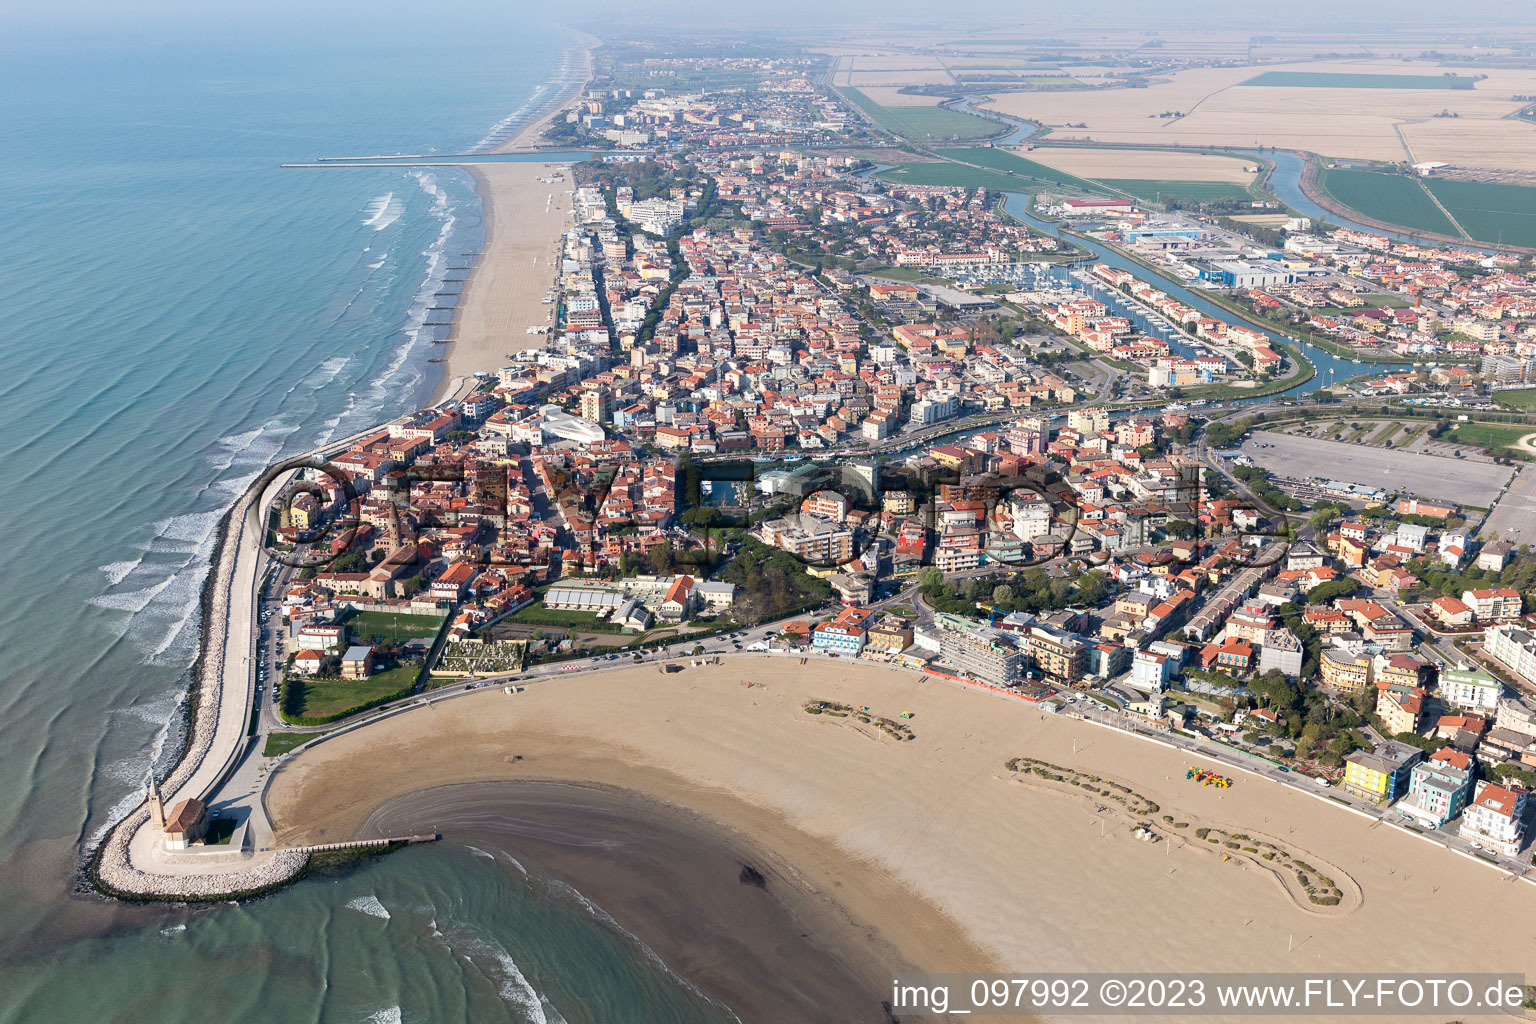 Caorle in the state Veneto, Italy viewn from the air